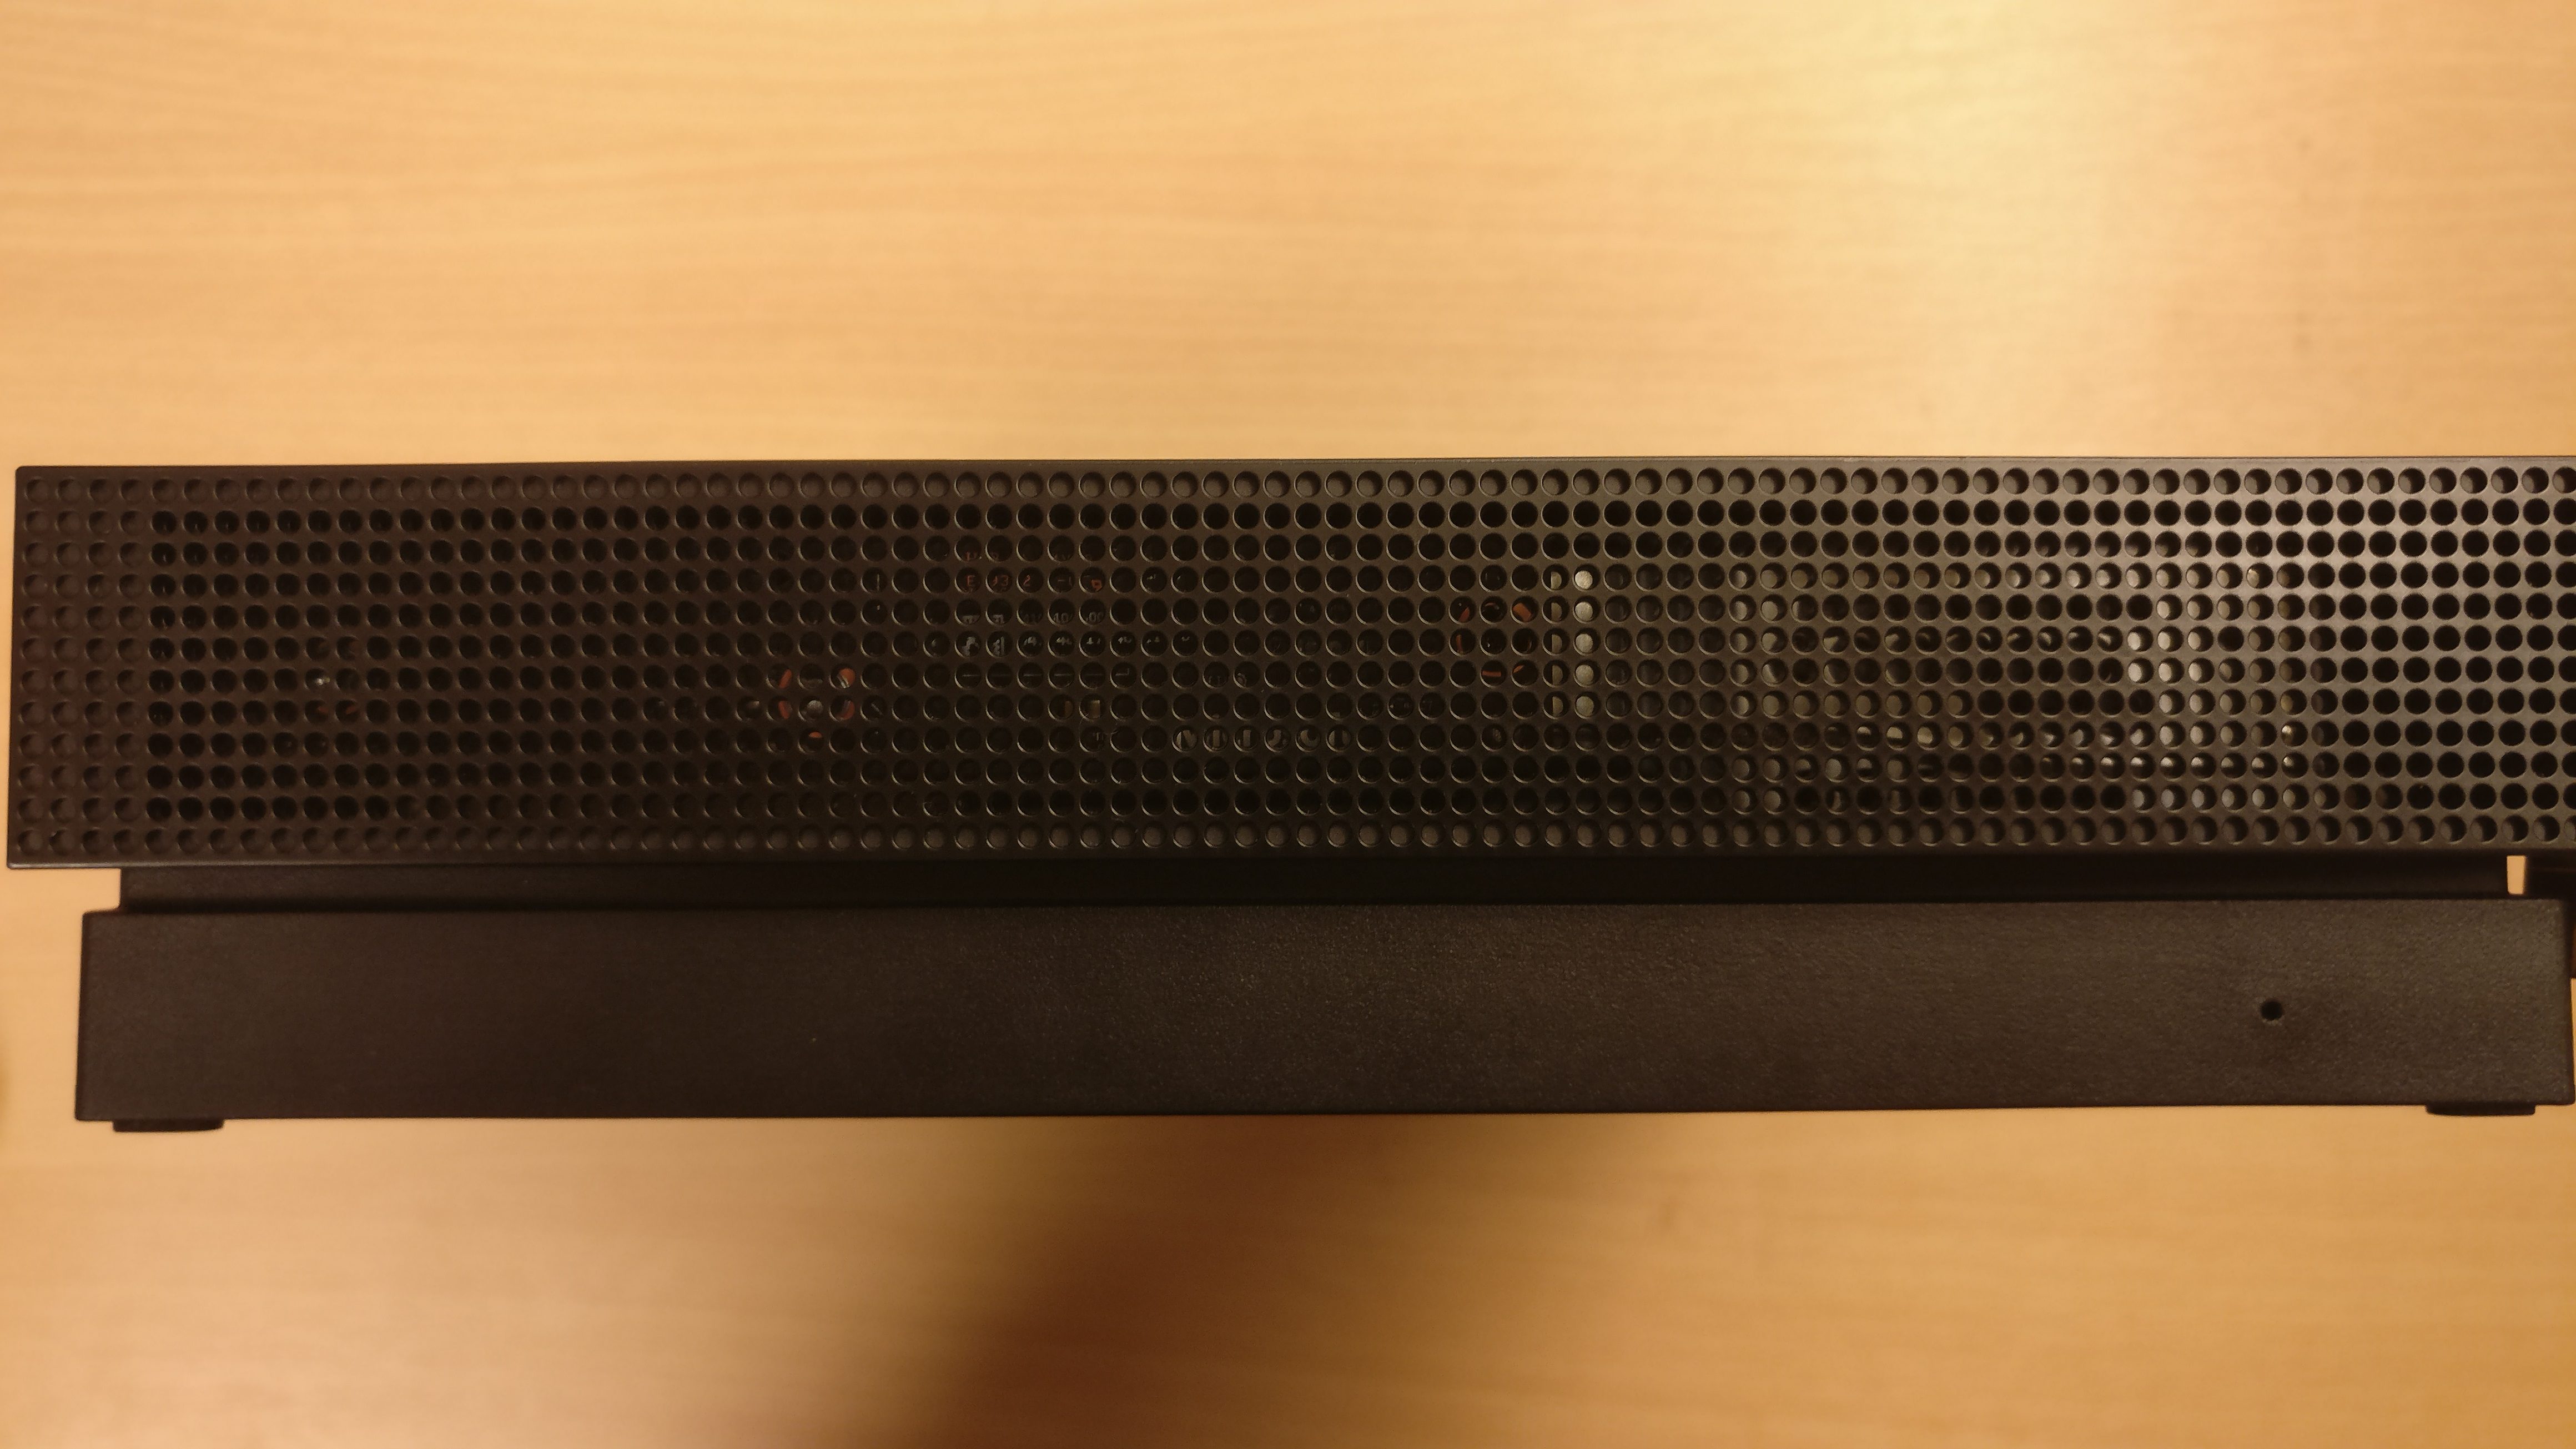 XBox One X Side Grill